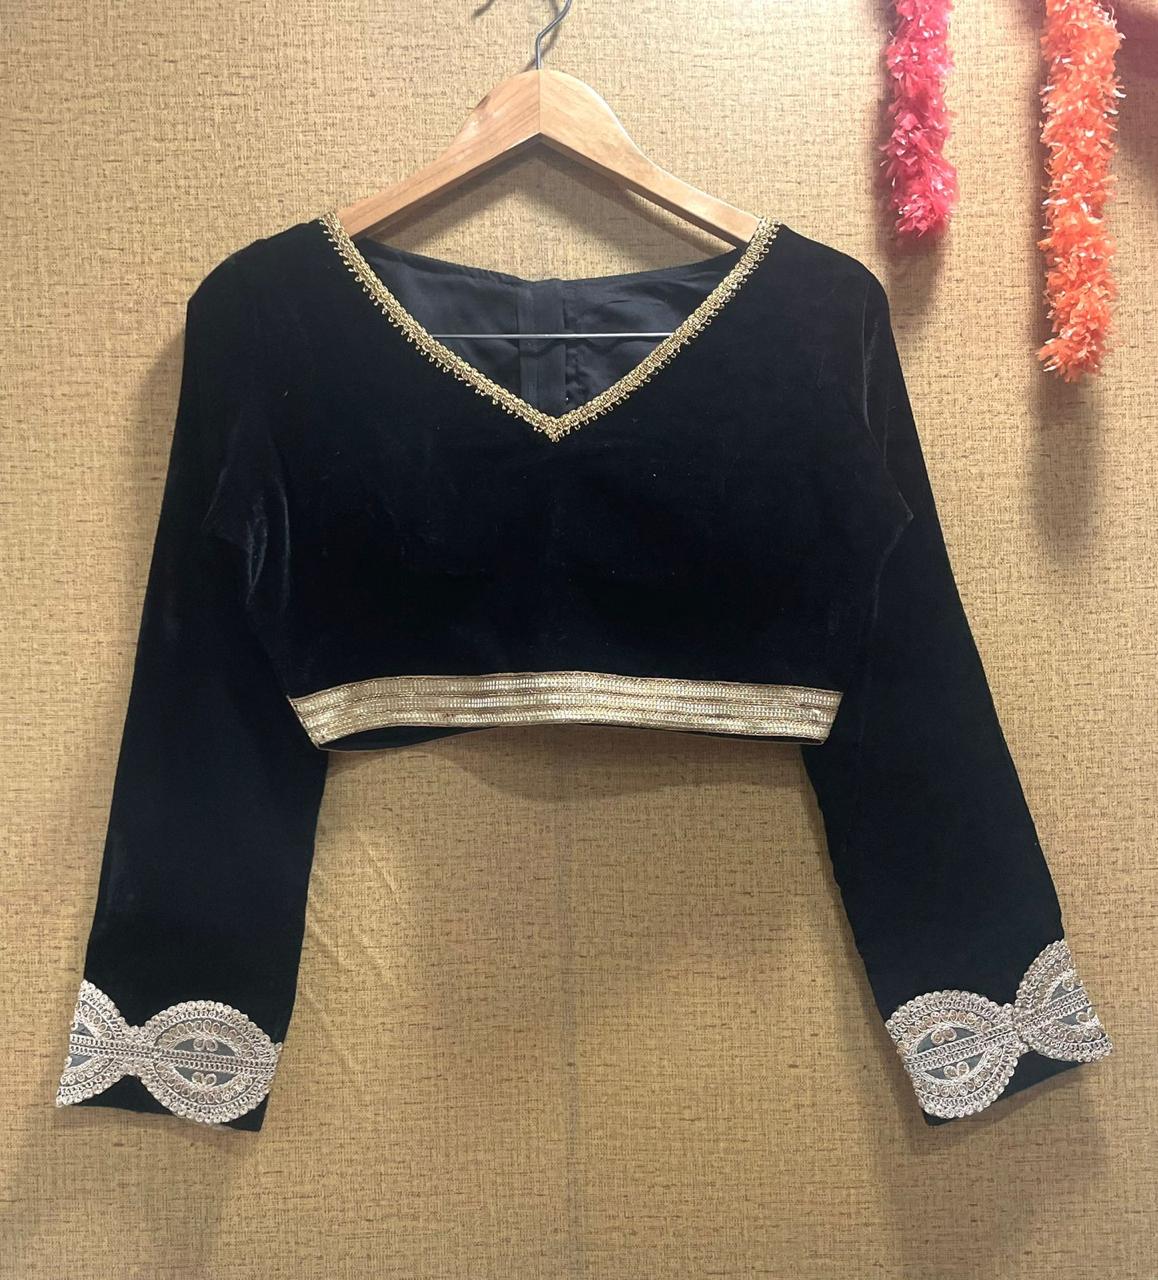 50 Latest Velvet Blouse Designs For Sarees And Lehengas (2021) | Velvet  blouse design, Black velvet blouse design, Saree blouse designs